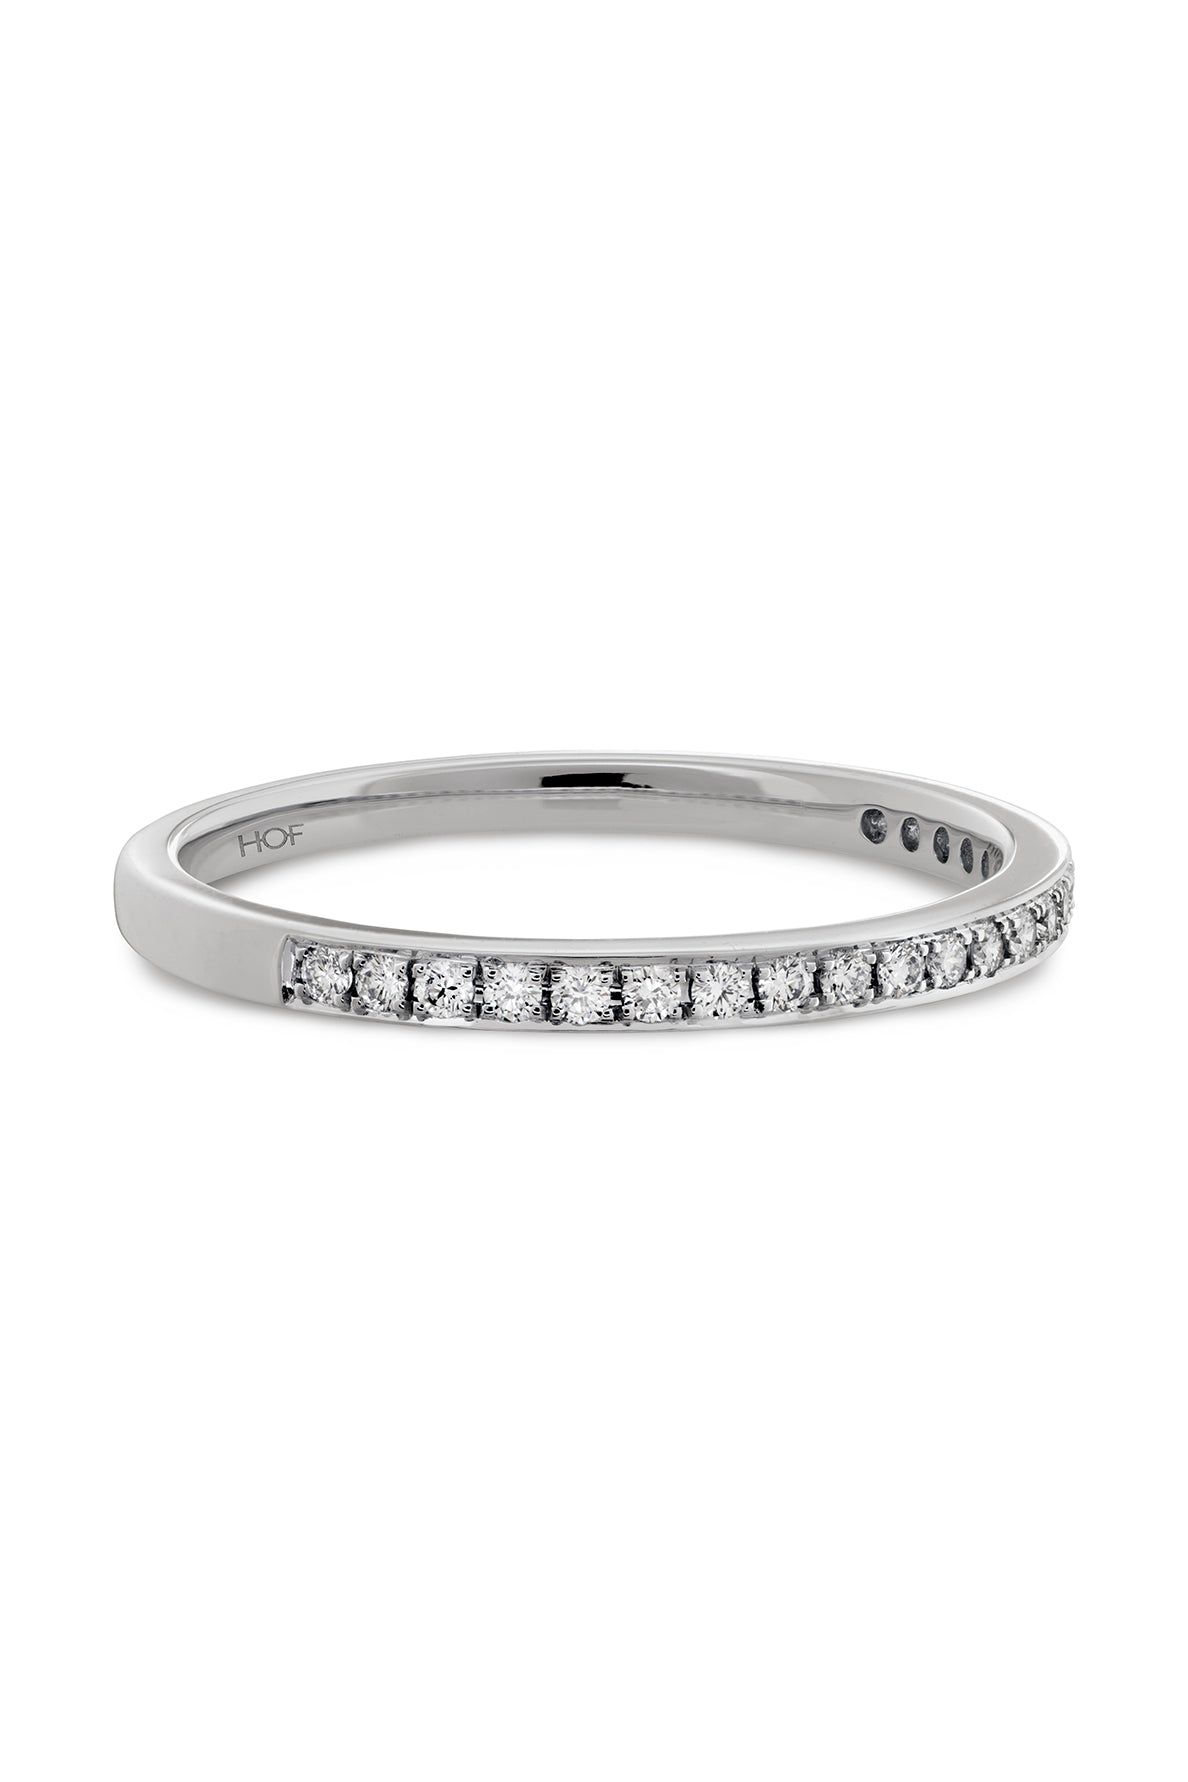 Signature Diamond Band From Hearts On Fire available at LeGassick Diamonds and Jewellery Gold Coast, Australia.